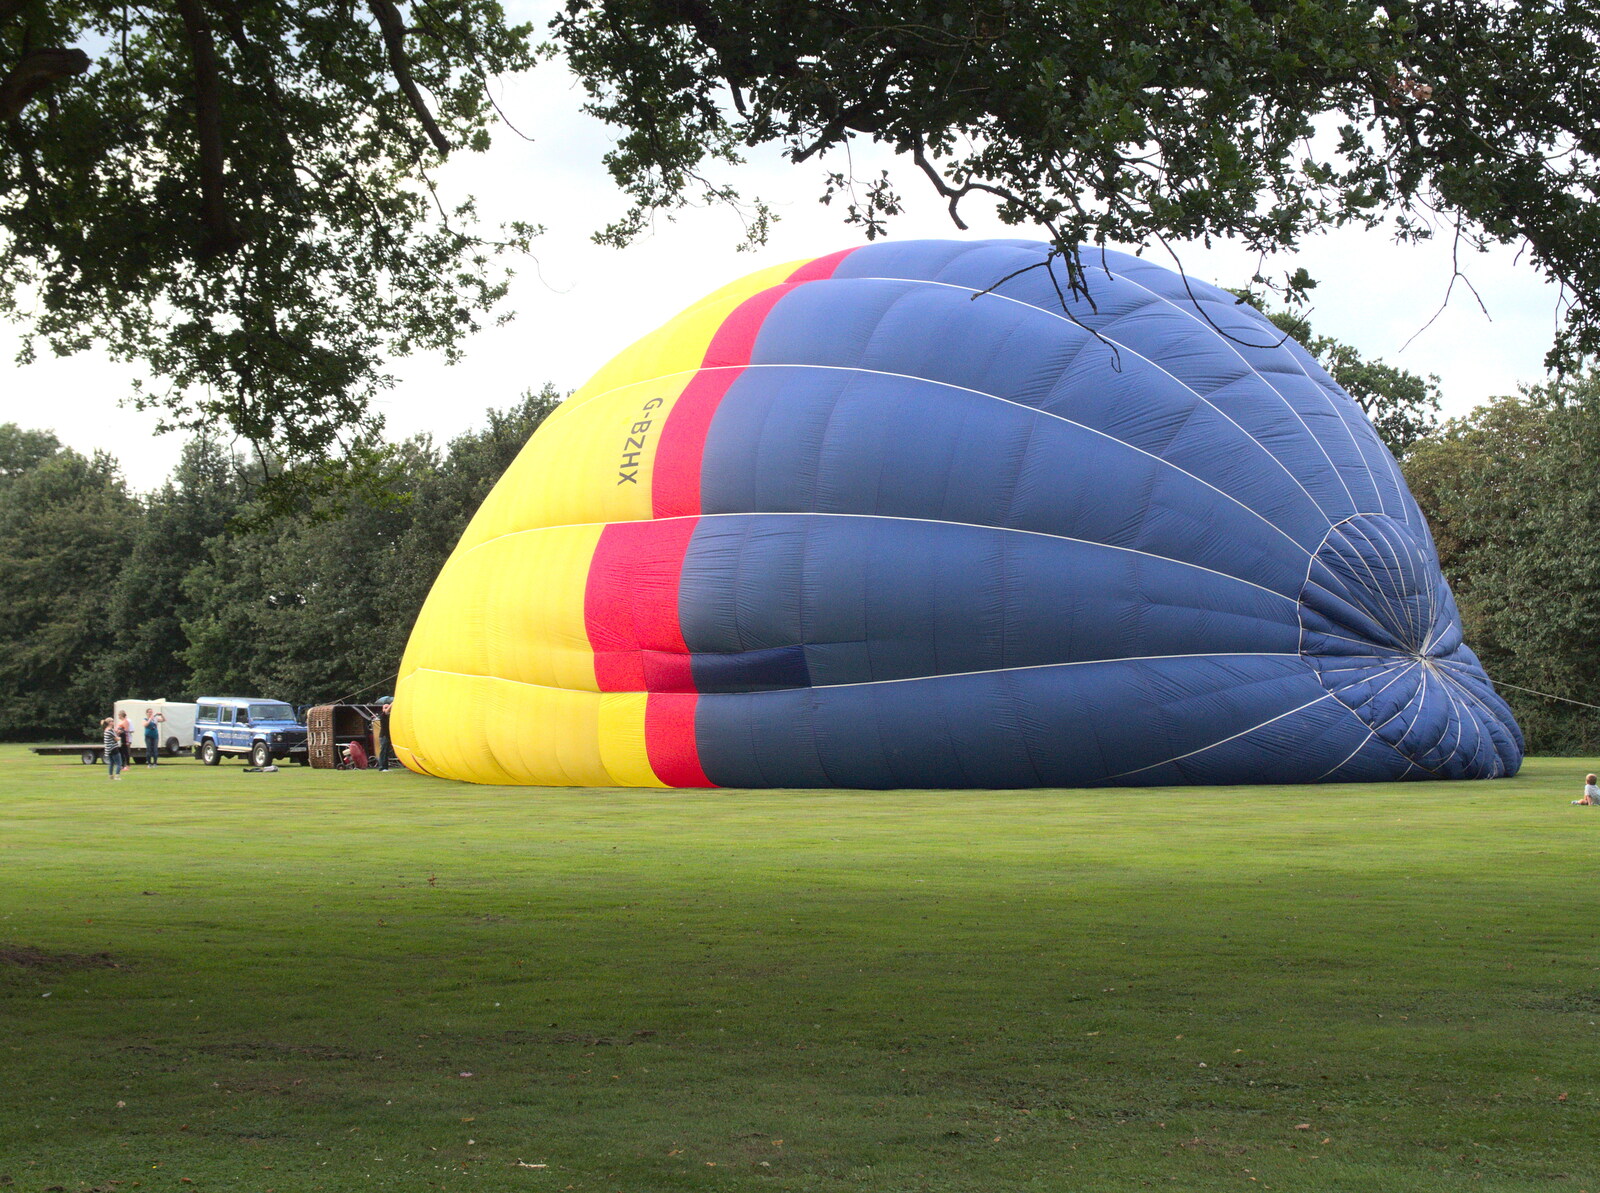 The Wizard ballon inflates from The BSCC at Yaxley and the Hoxne Beer Festival, Suffolk - 31st August 2017